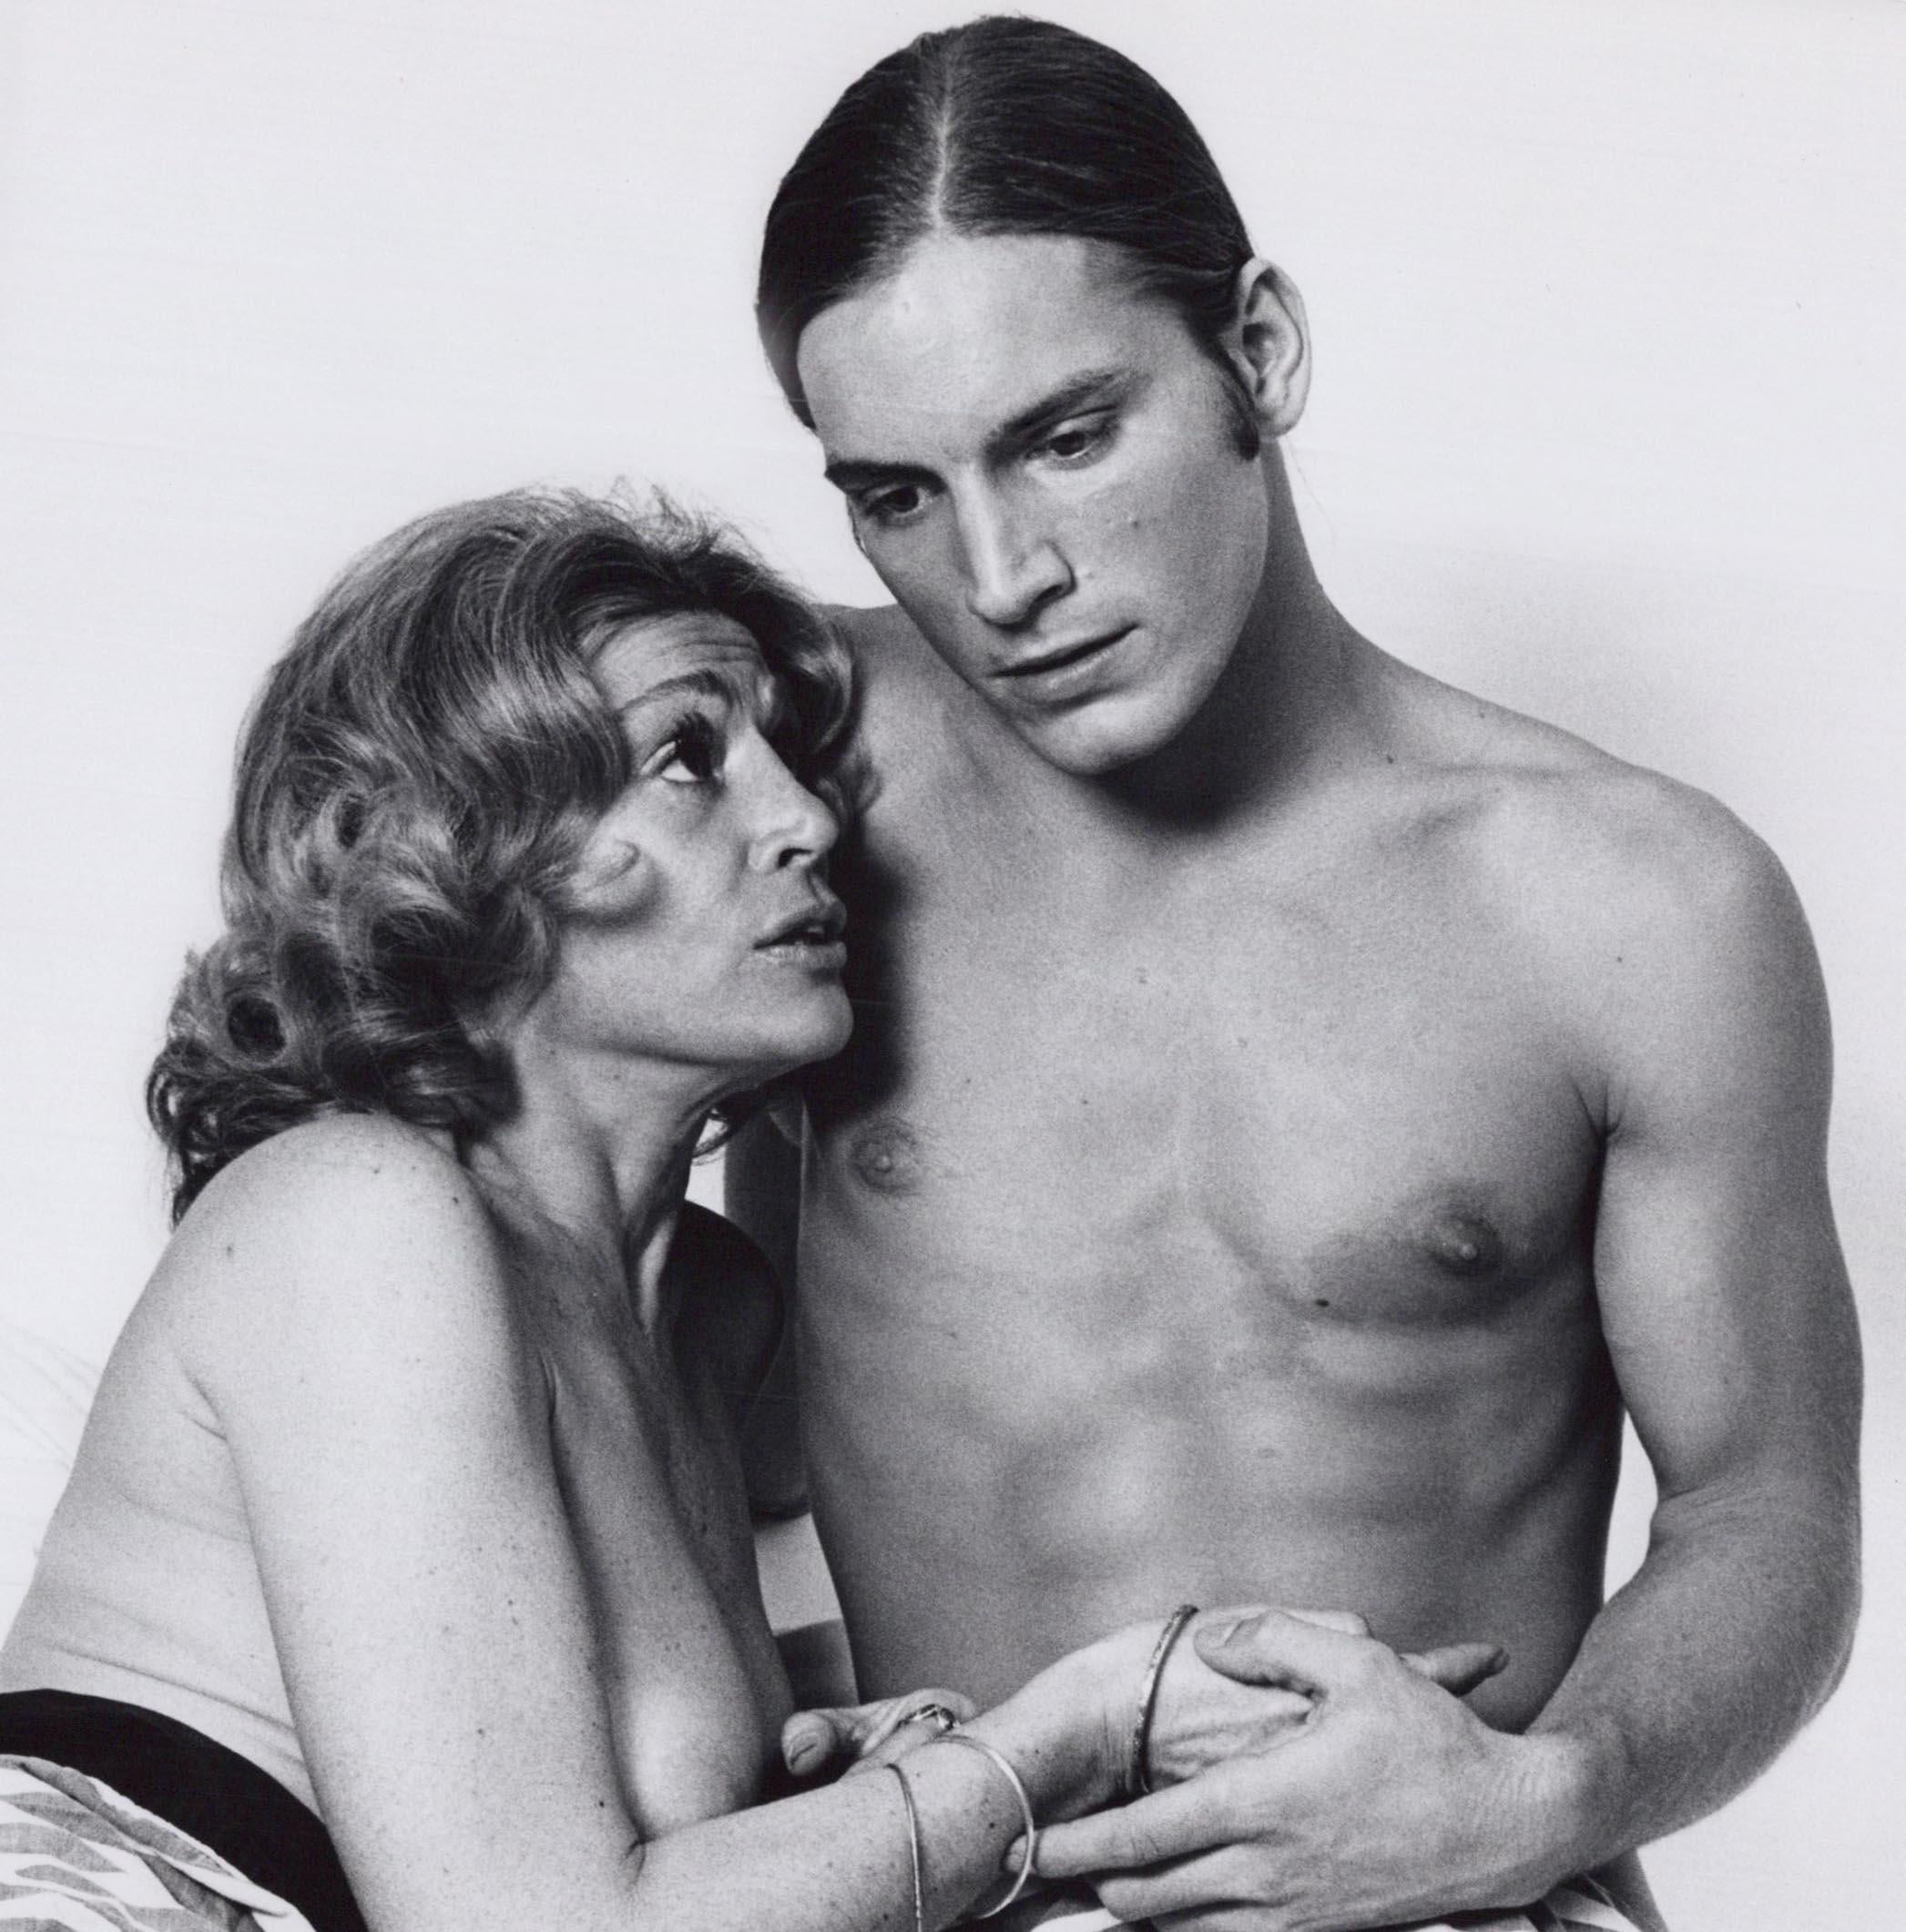 Andy Warhol superstars Joe Dallesandro and Sylvia Miles in 'Heat' - Photograph by Jack Mitchell